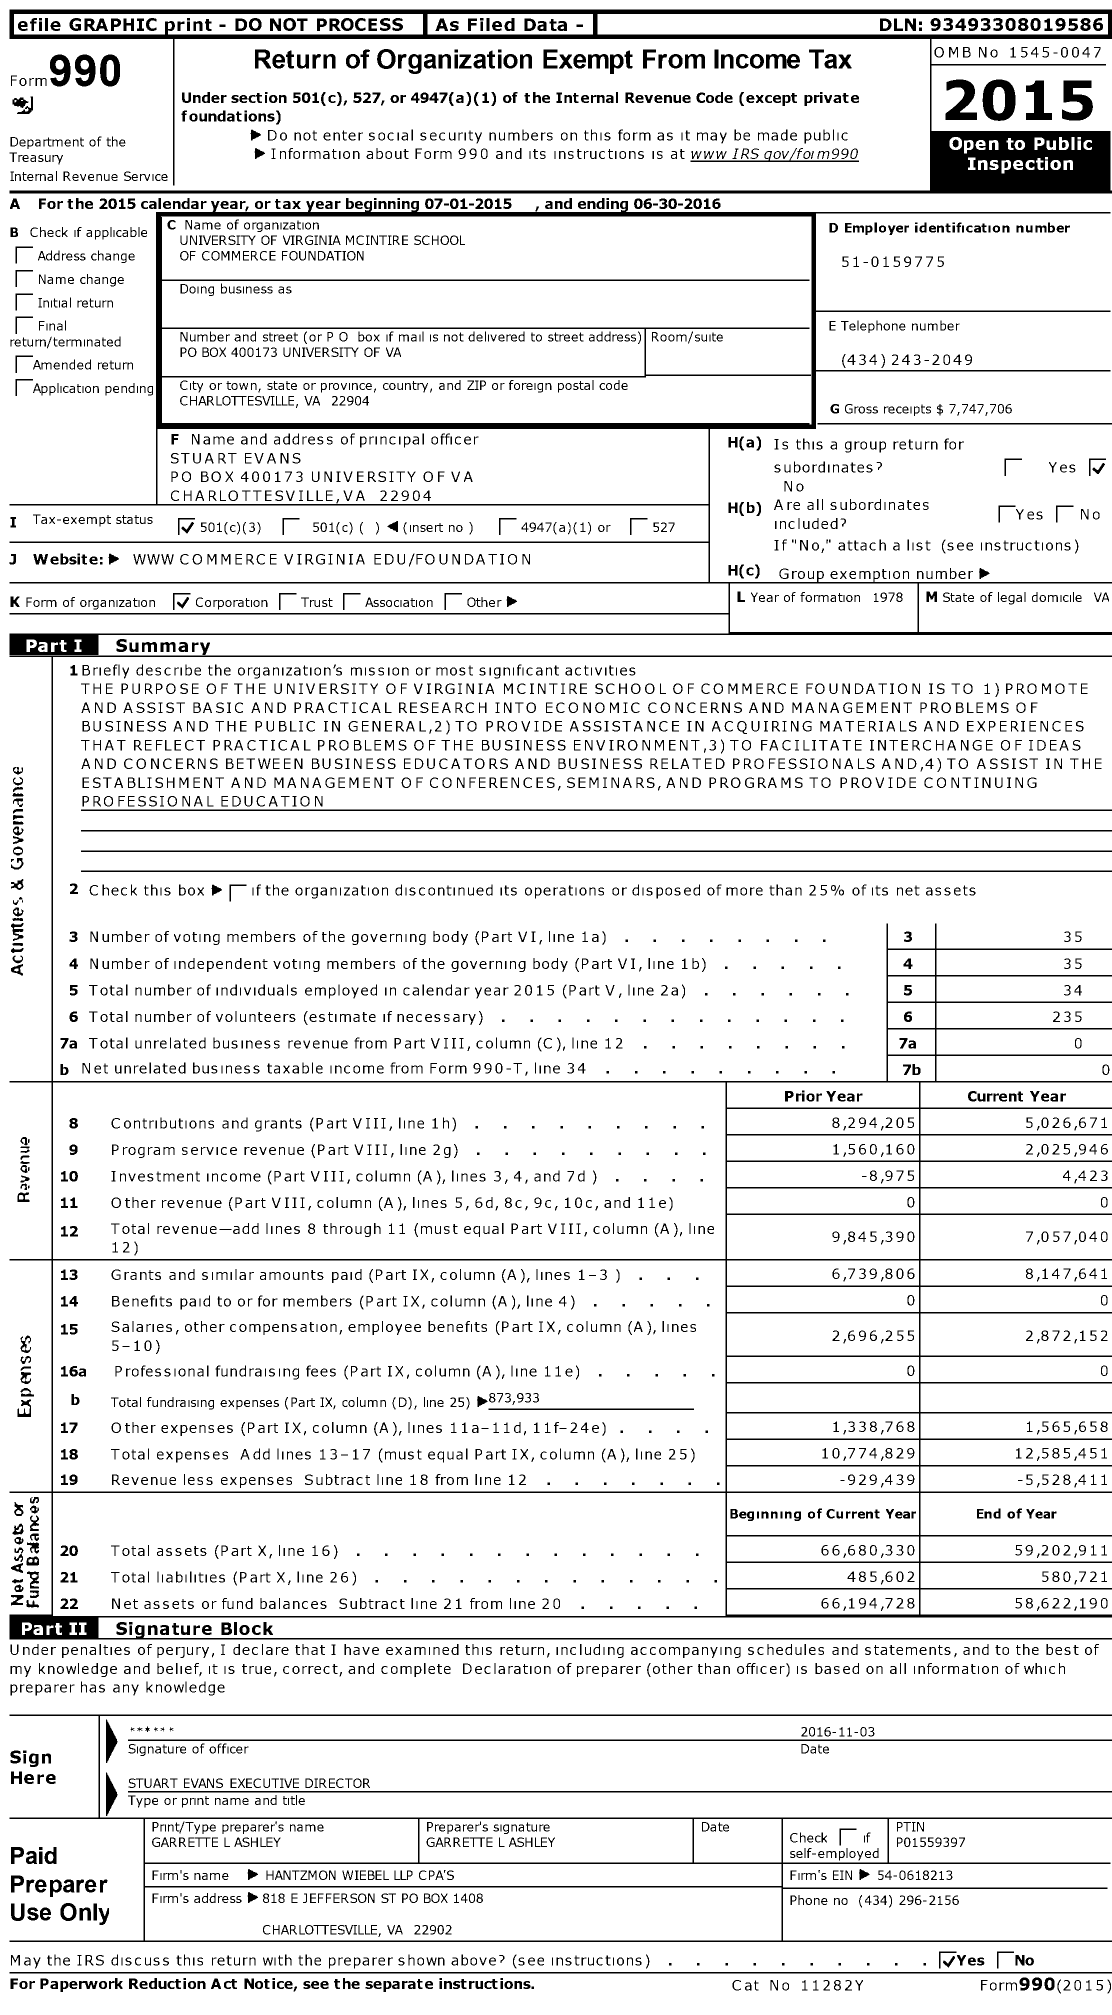 Image of first page of 2015 Form 990 for The University of Virginia Mcintire School of Commerce Foundation